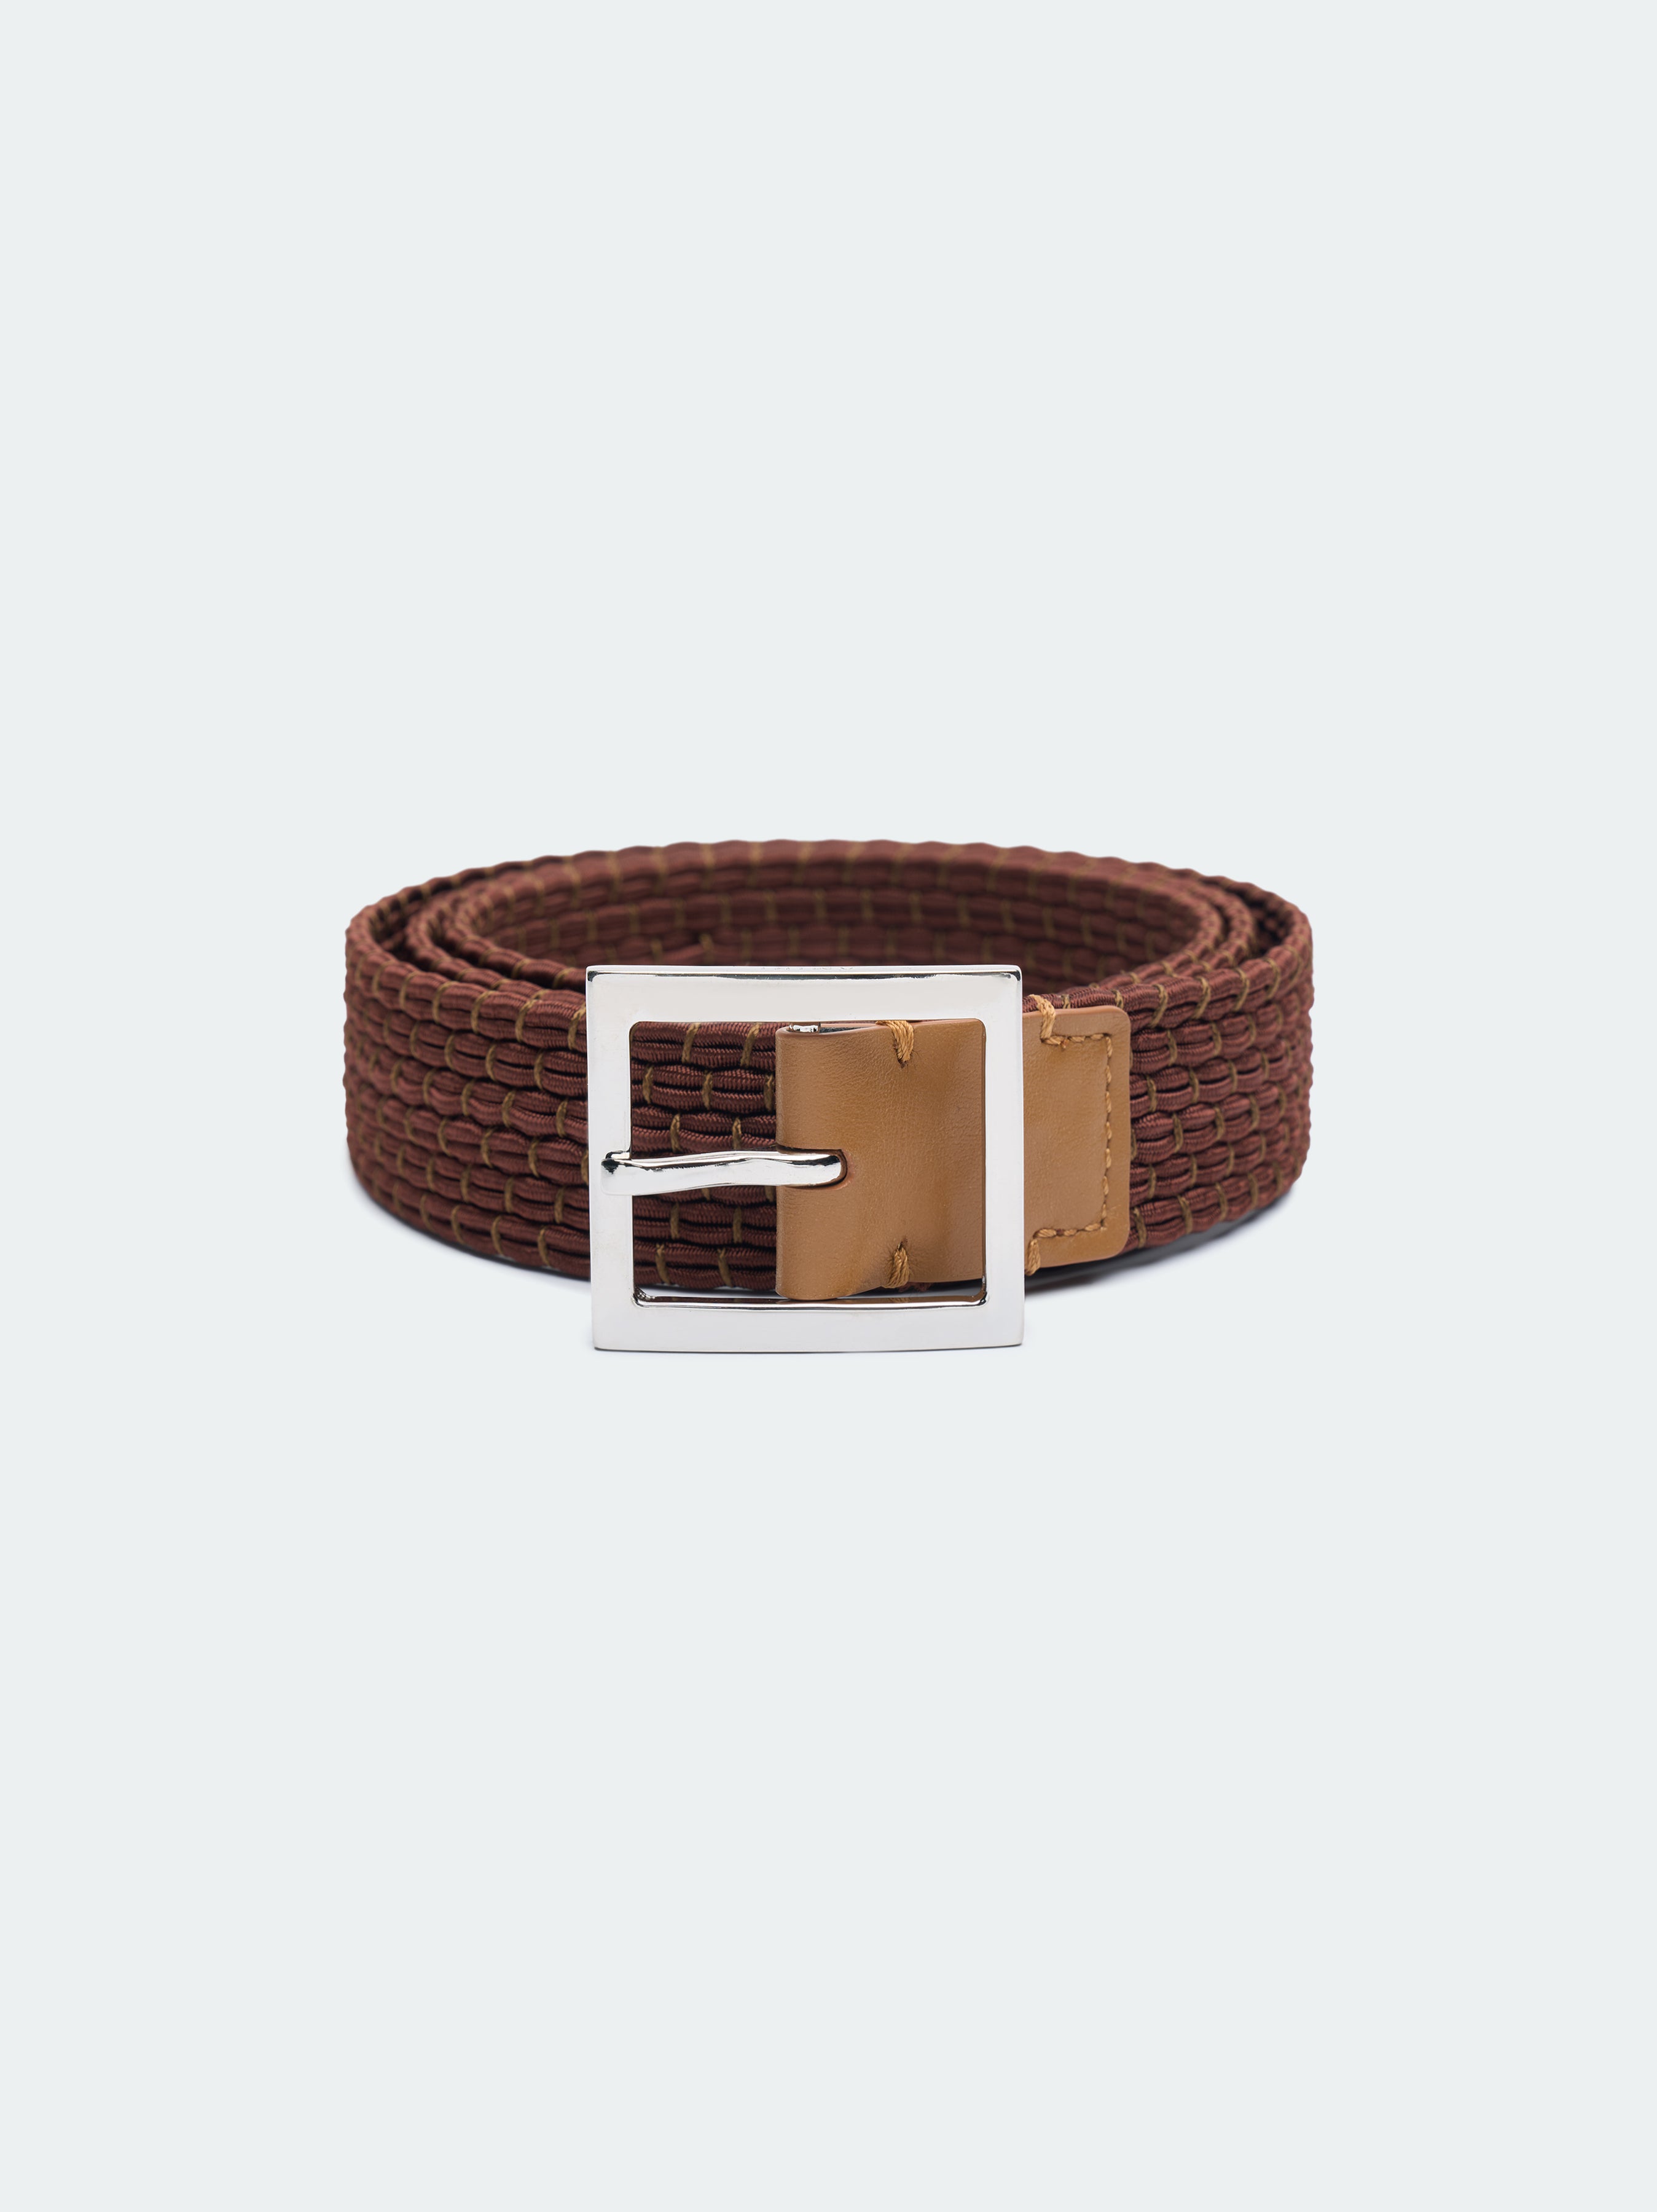 Product BRAIDED SKATER BELT - Brown featured image